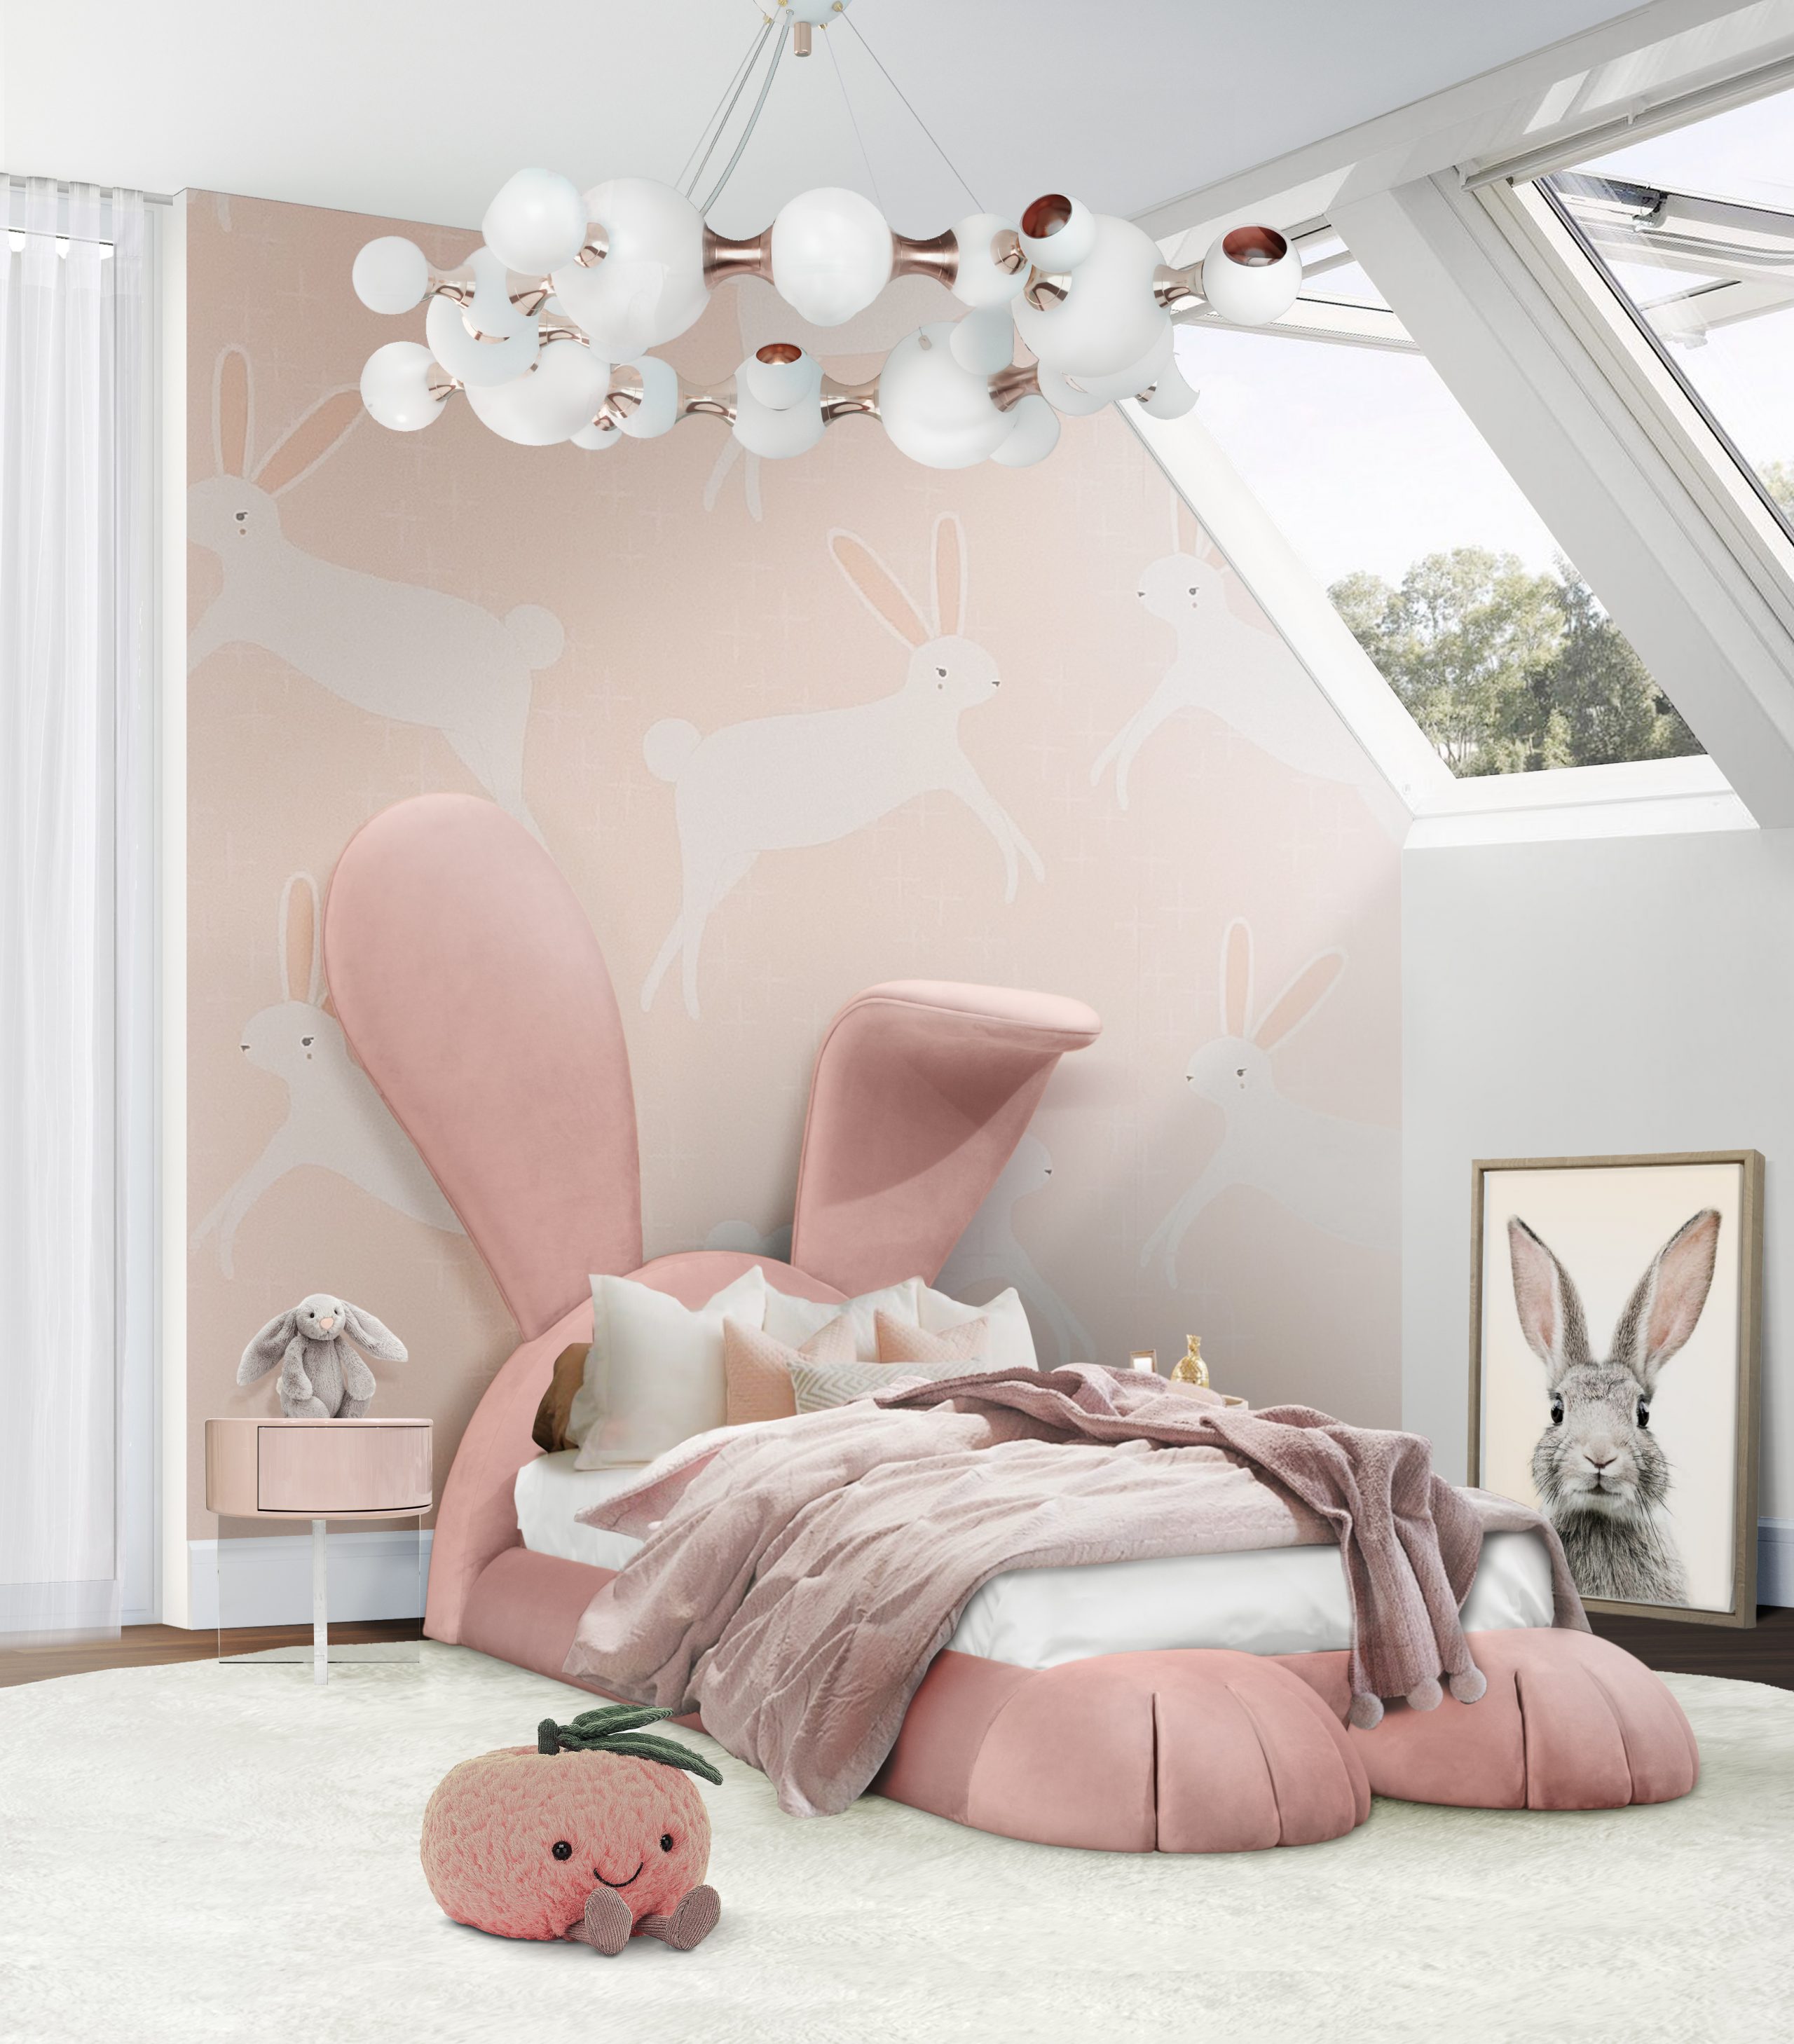 Marvel At These Magical Child´s Bedroom Ambiances